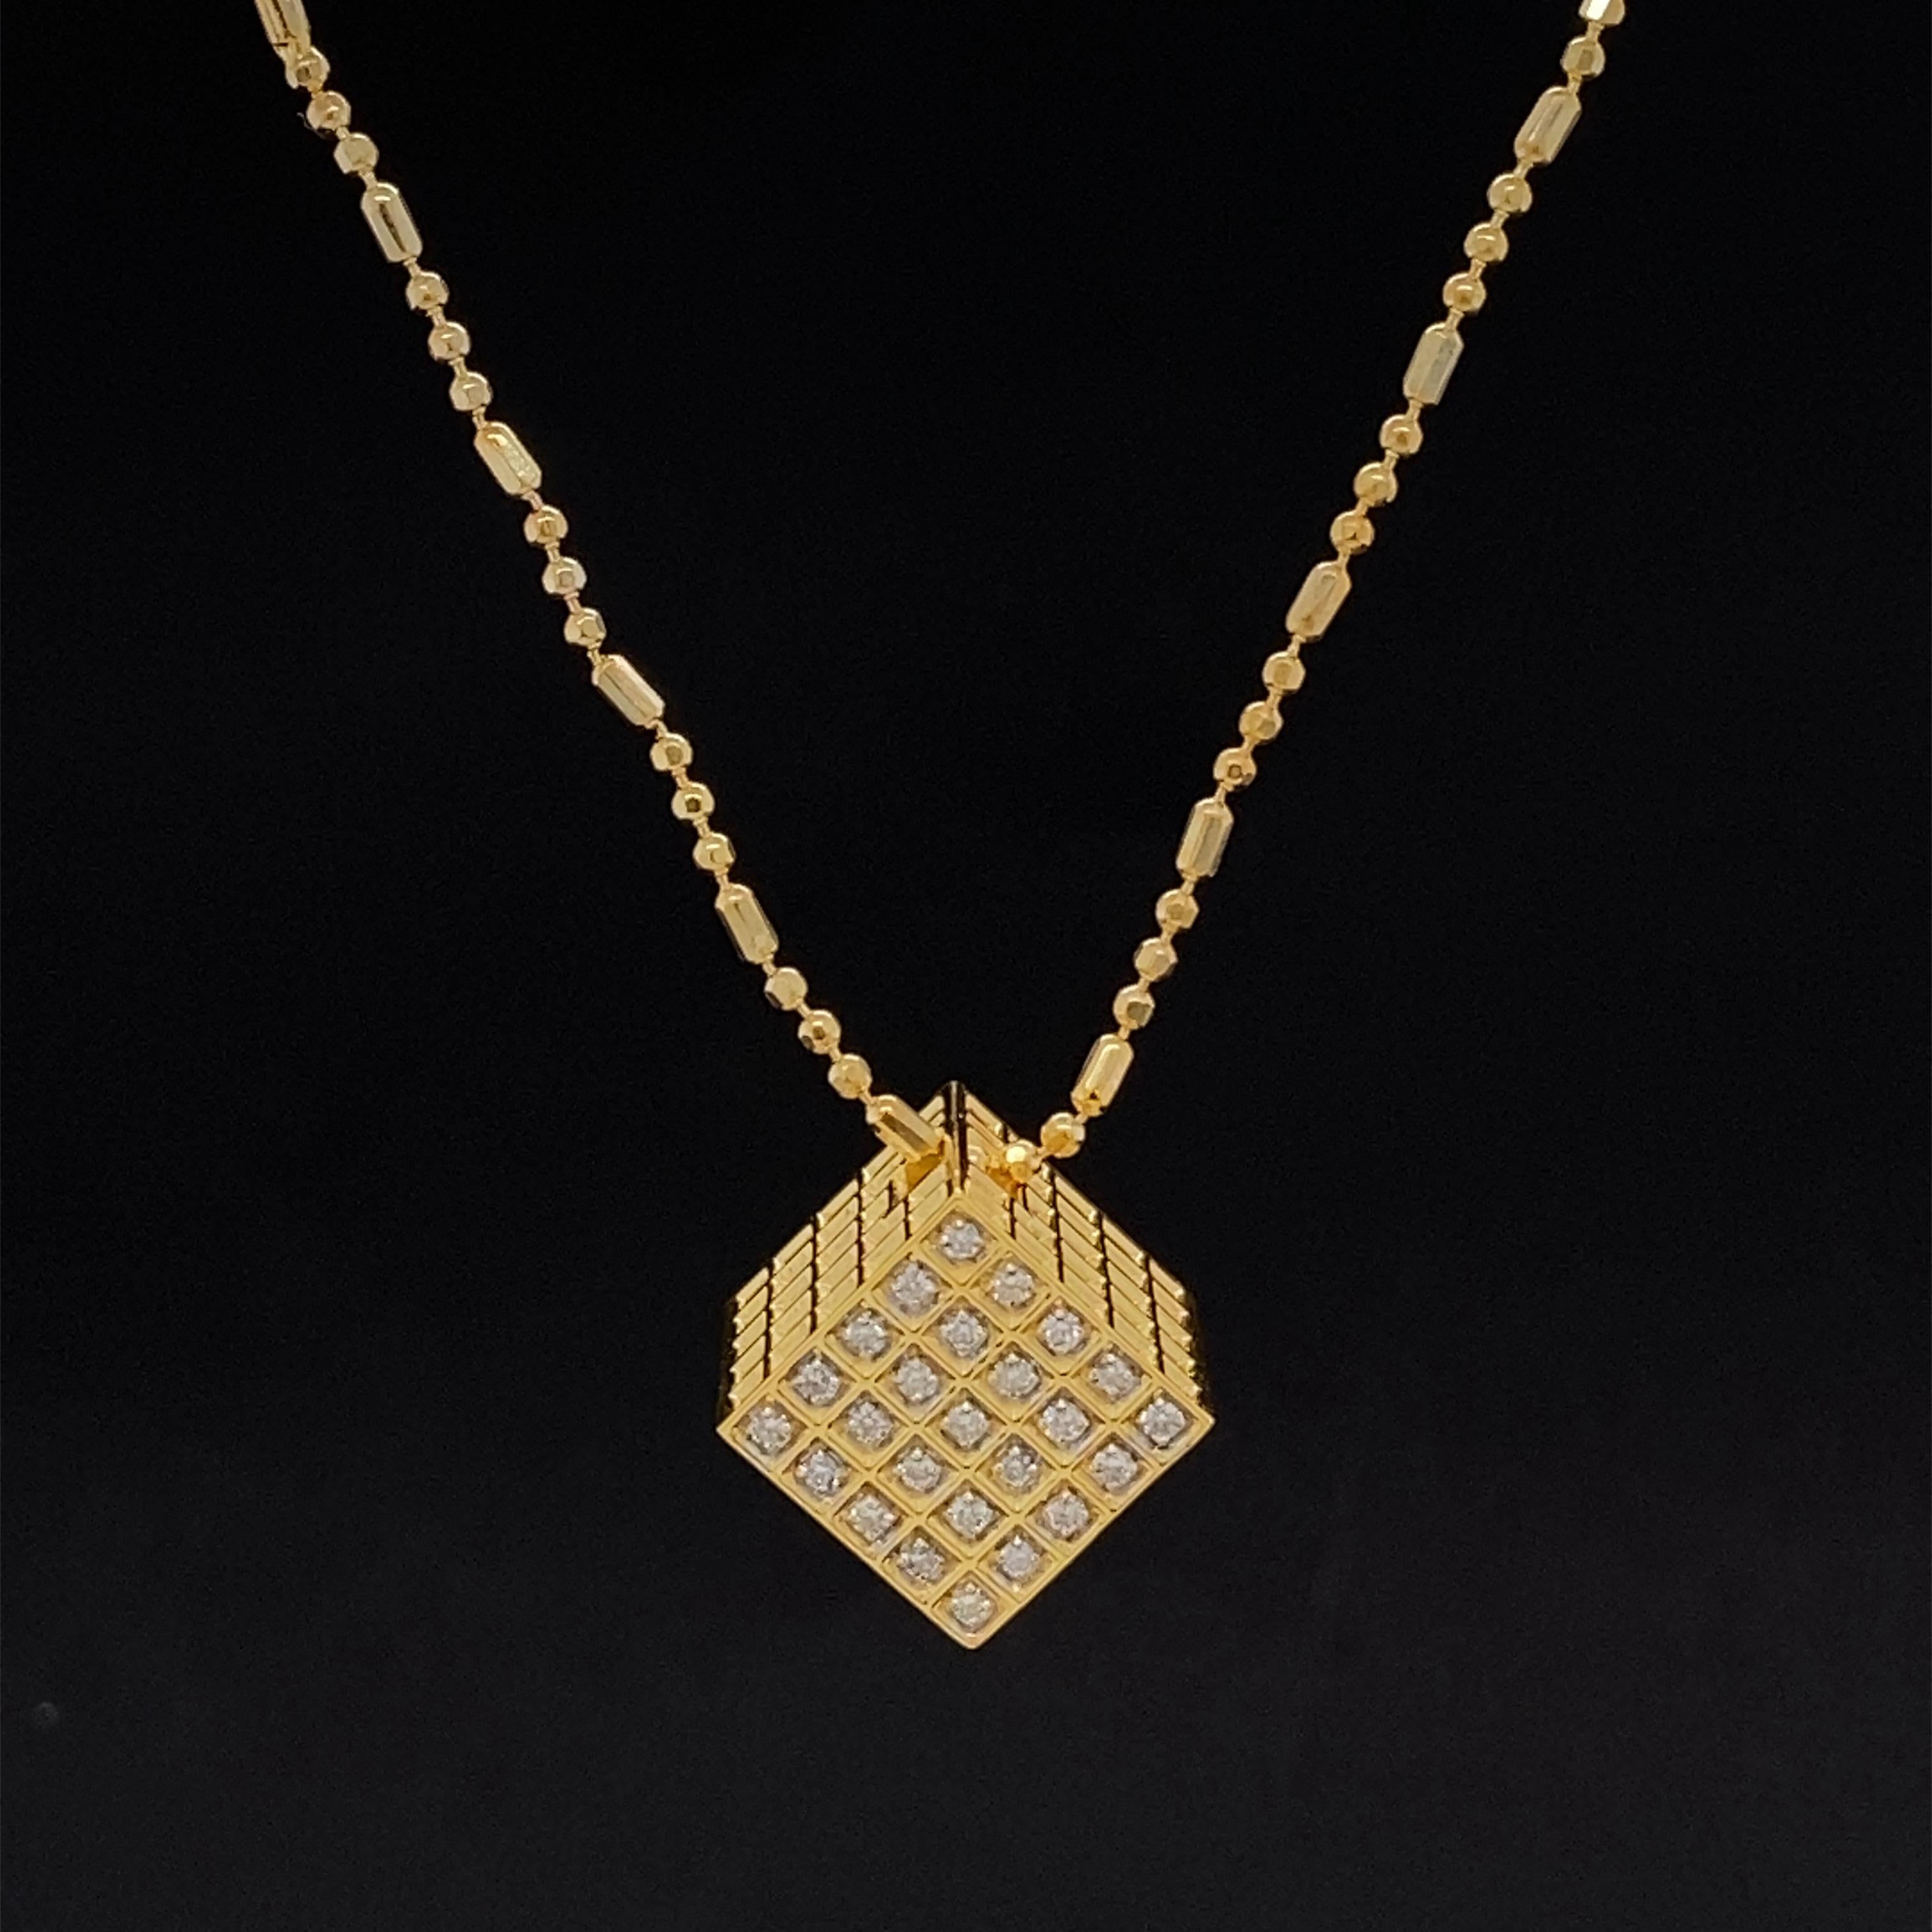 3D Solid Cube Diamond Pendant in 18k Solid Gold For Sale 1